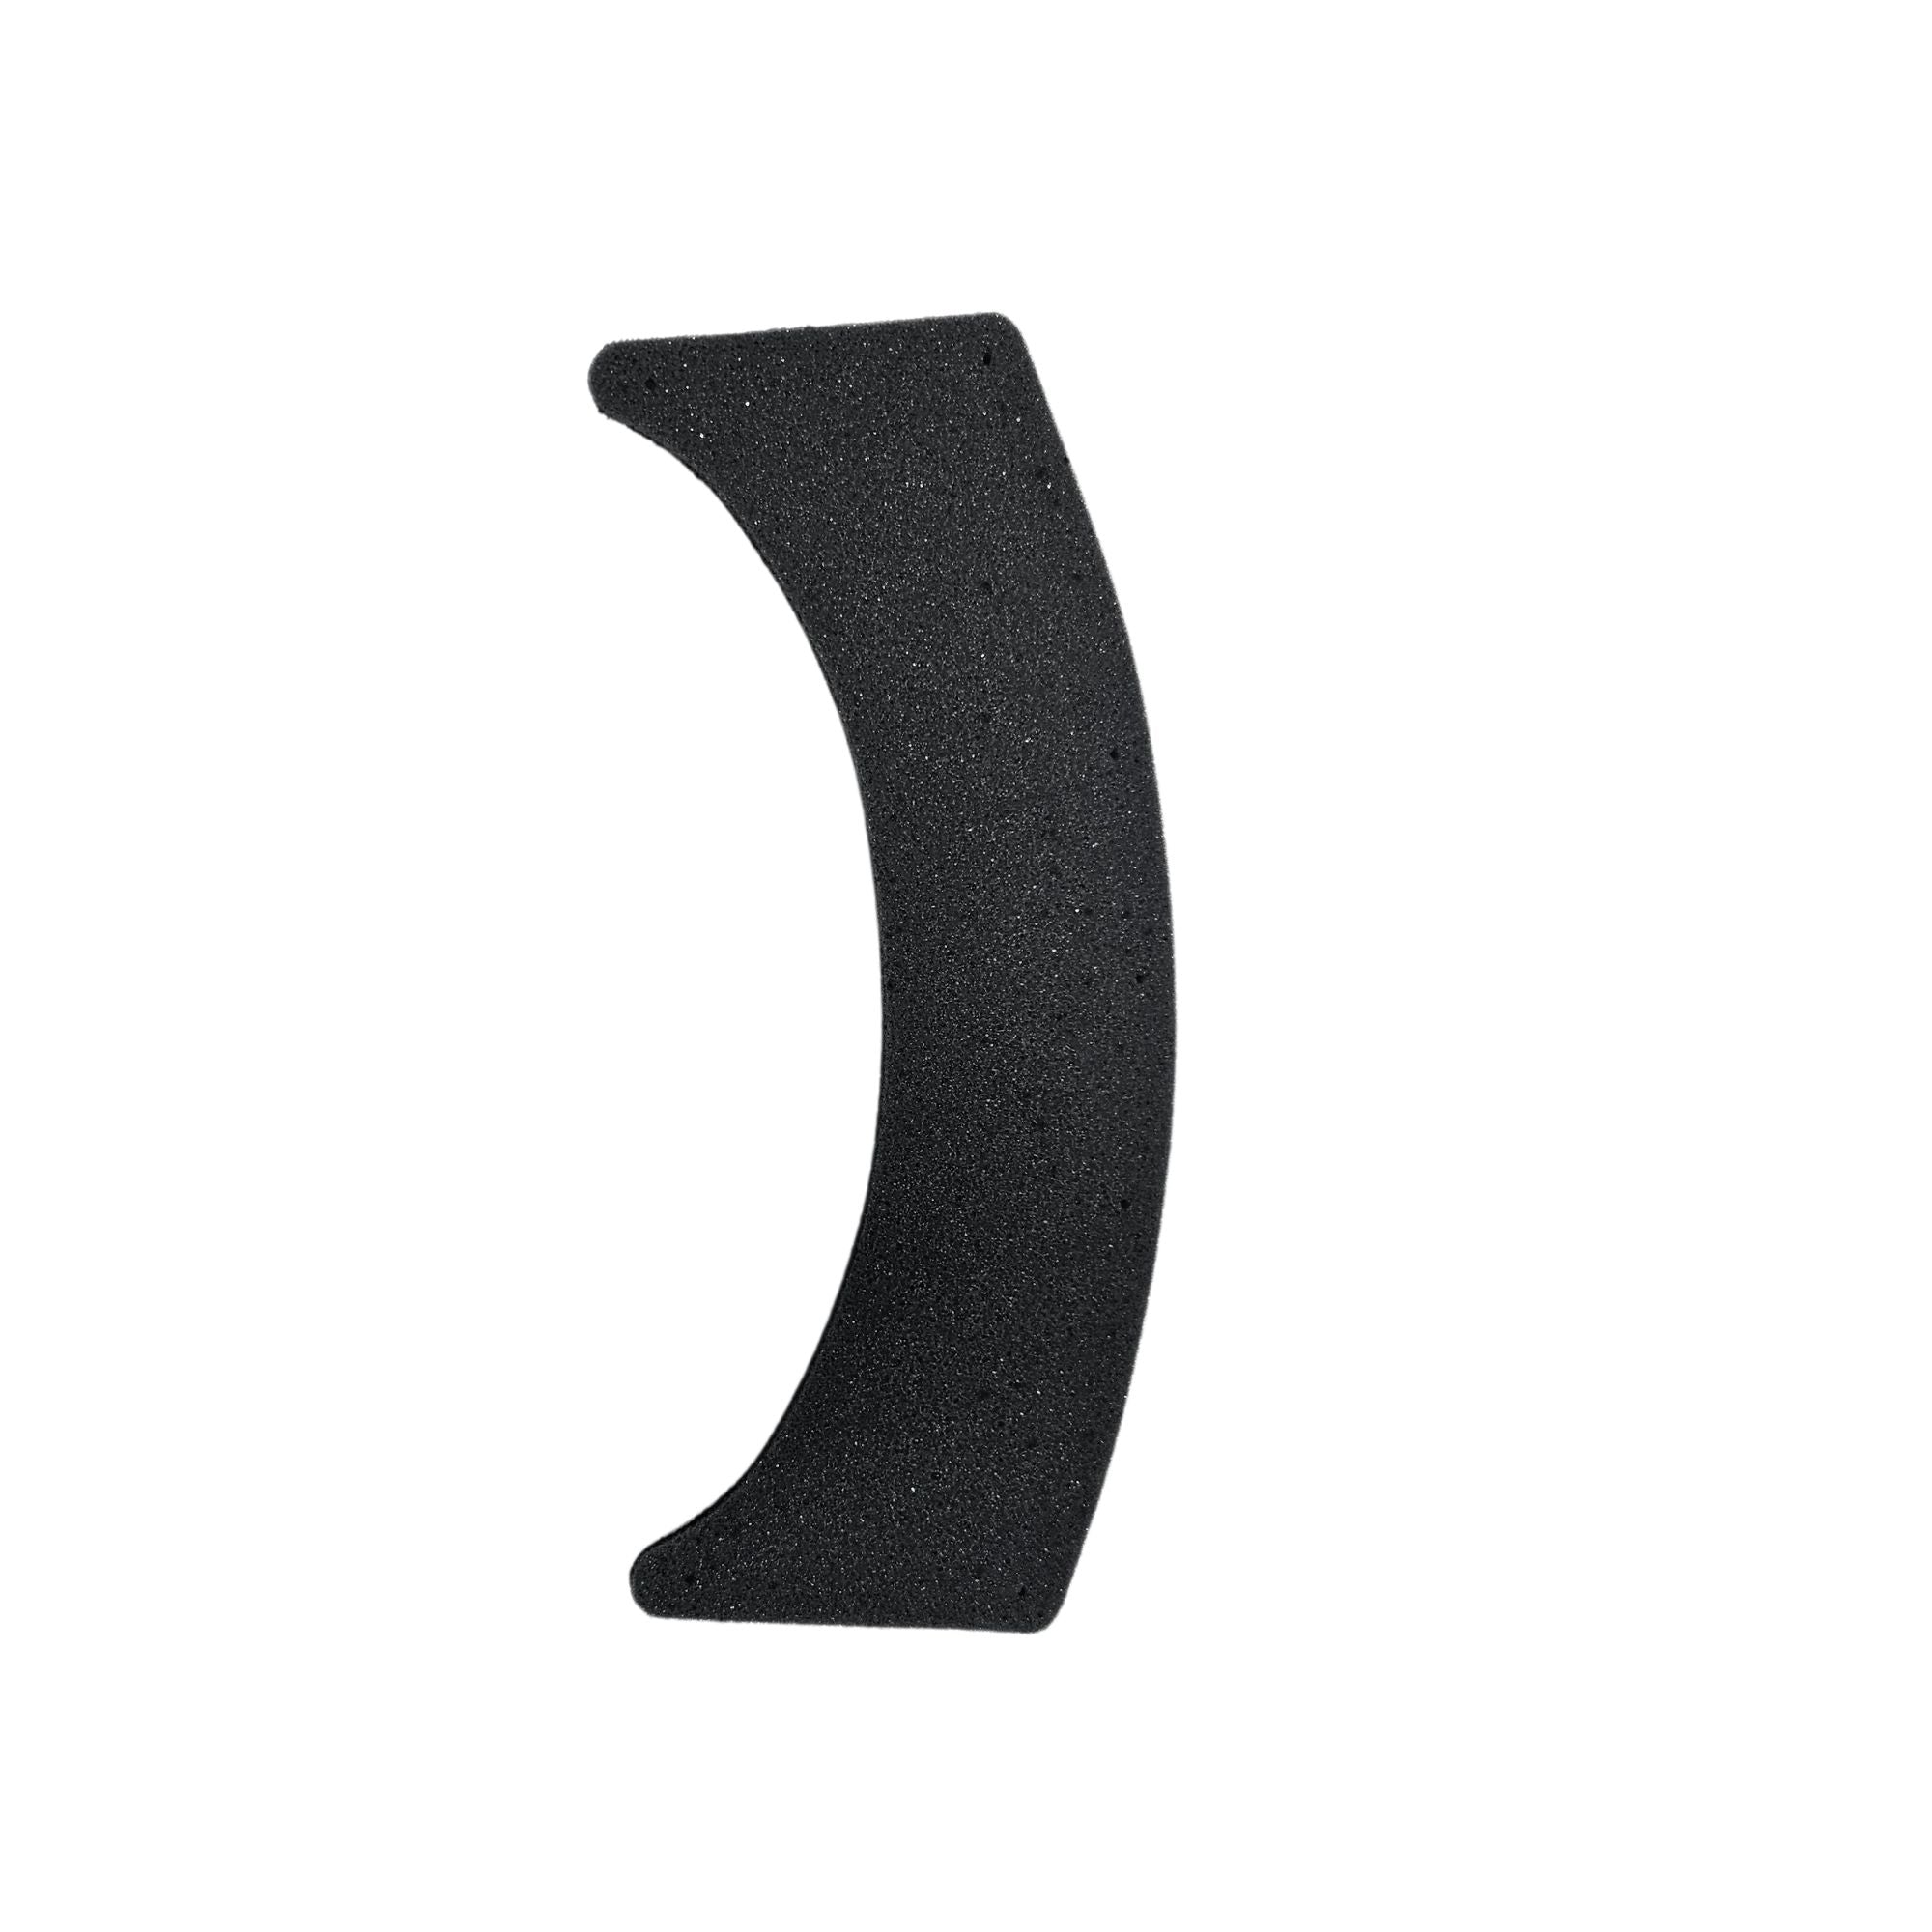 STIHL Sweatband Replacement for Function Helmet System | 0000 889 9044